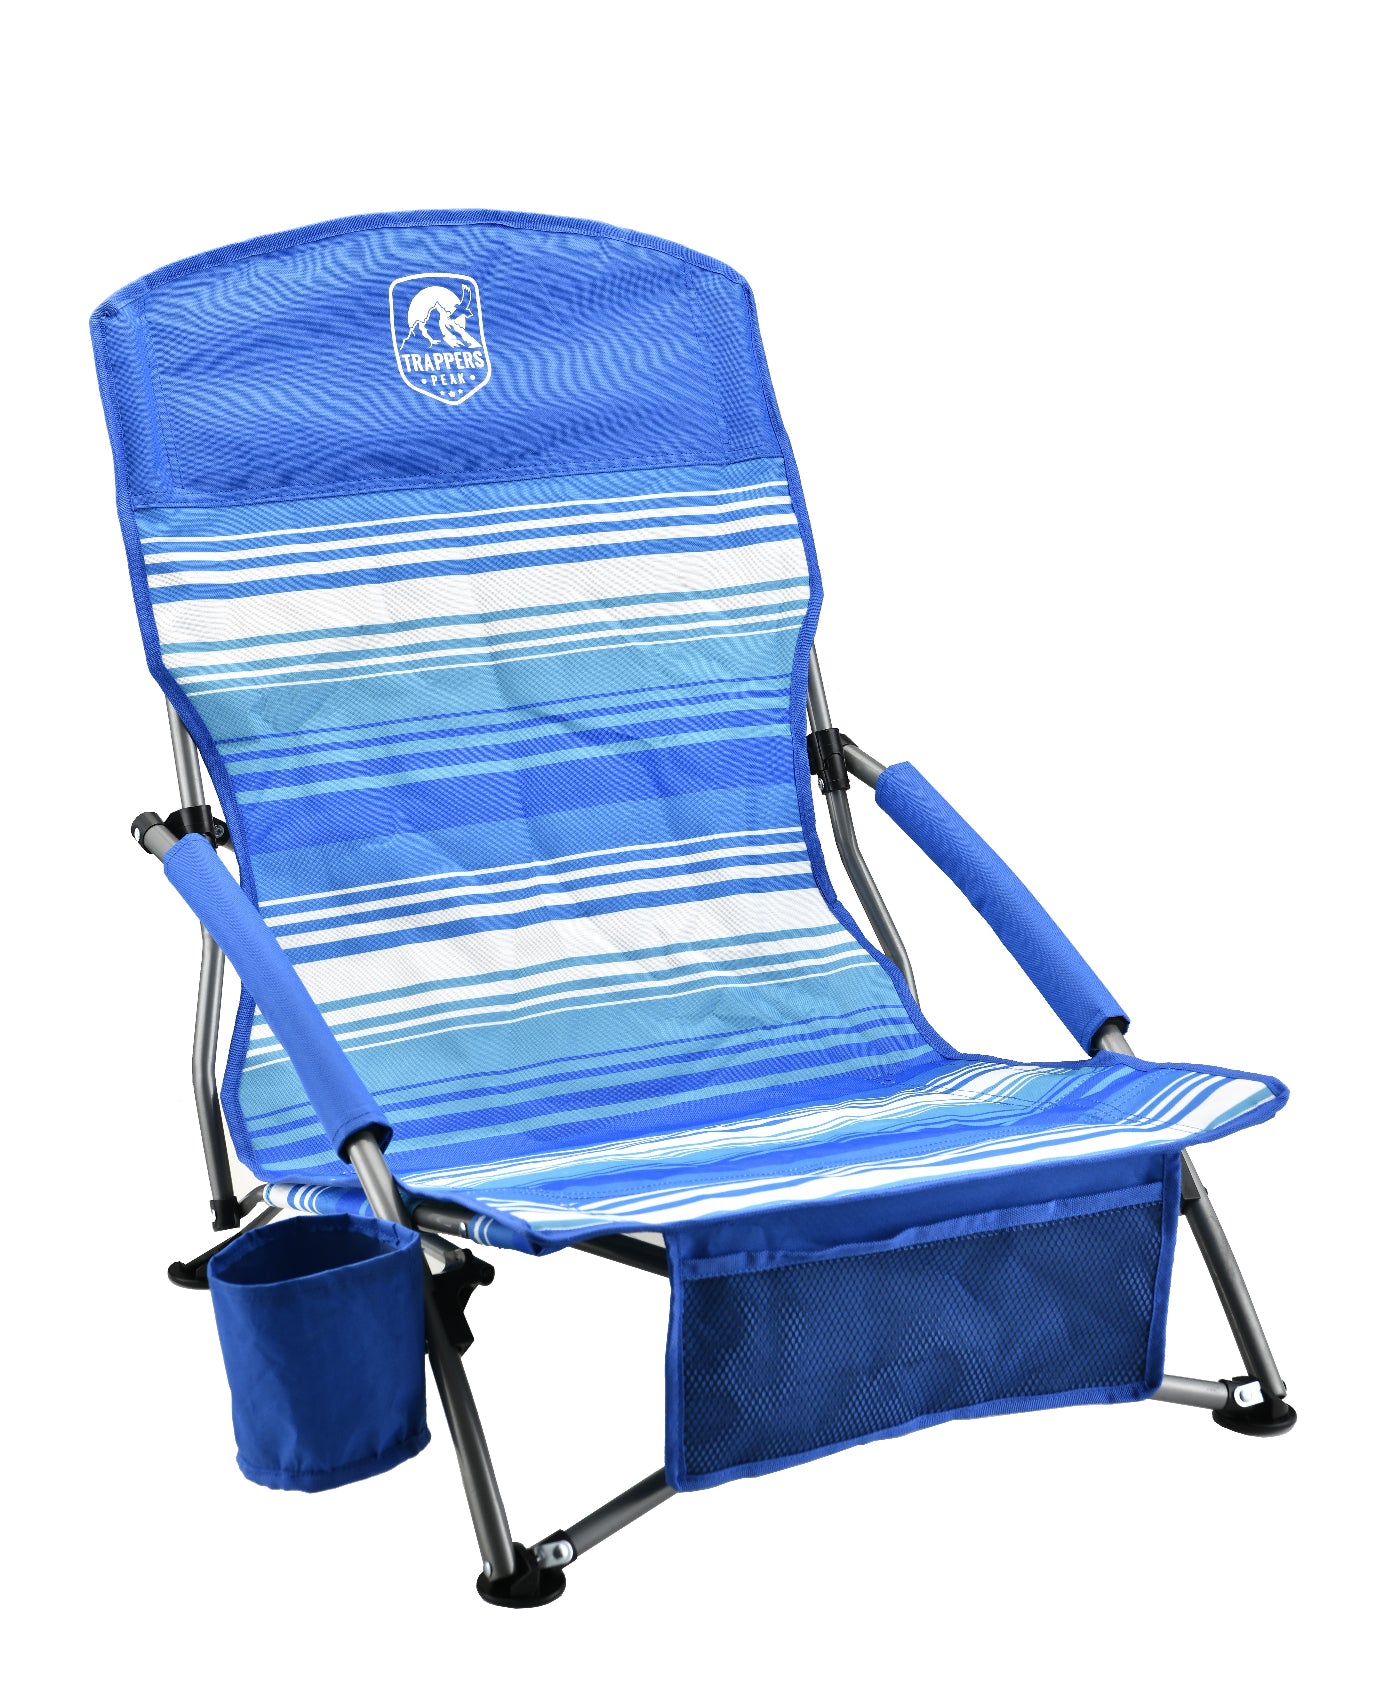 LOW BEACH CHAIRS W/ DRINK HOLDR+POCKT (STRIPES) 2 colors sold separately 3 of each color in a case